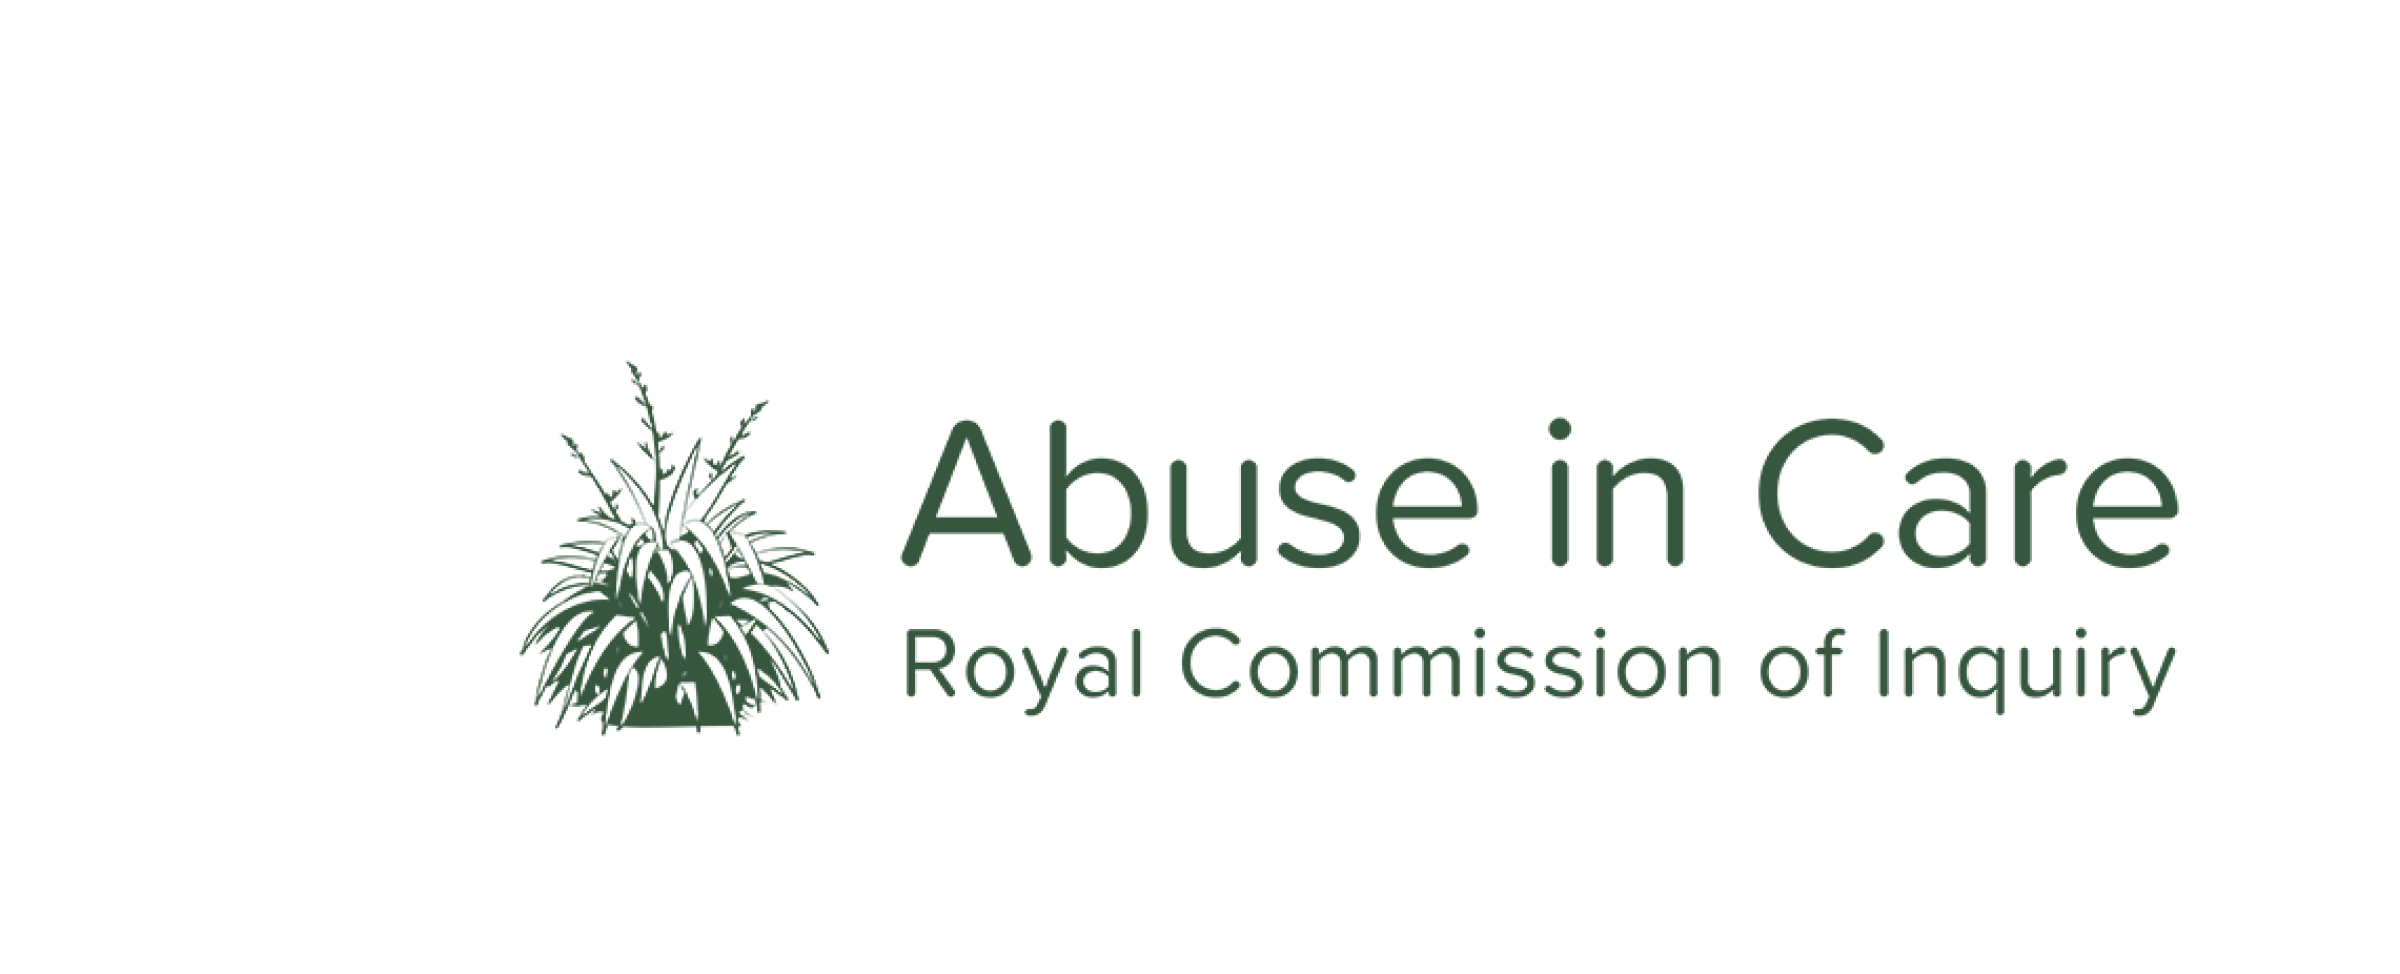 Royal Commission of Inquiry into Abuse in Care